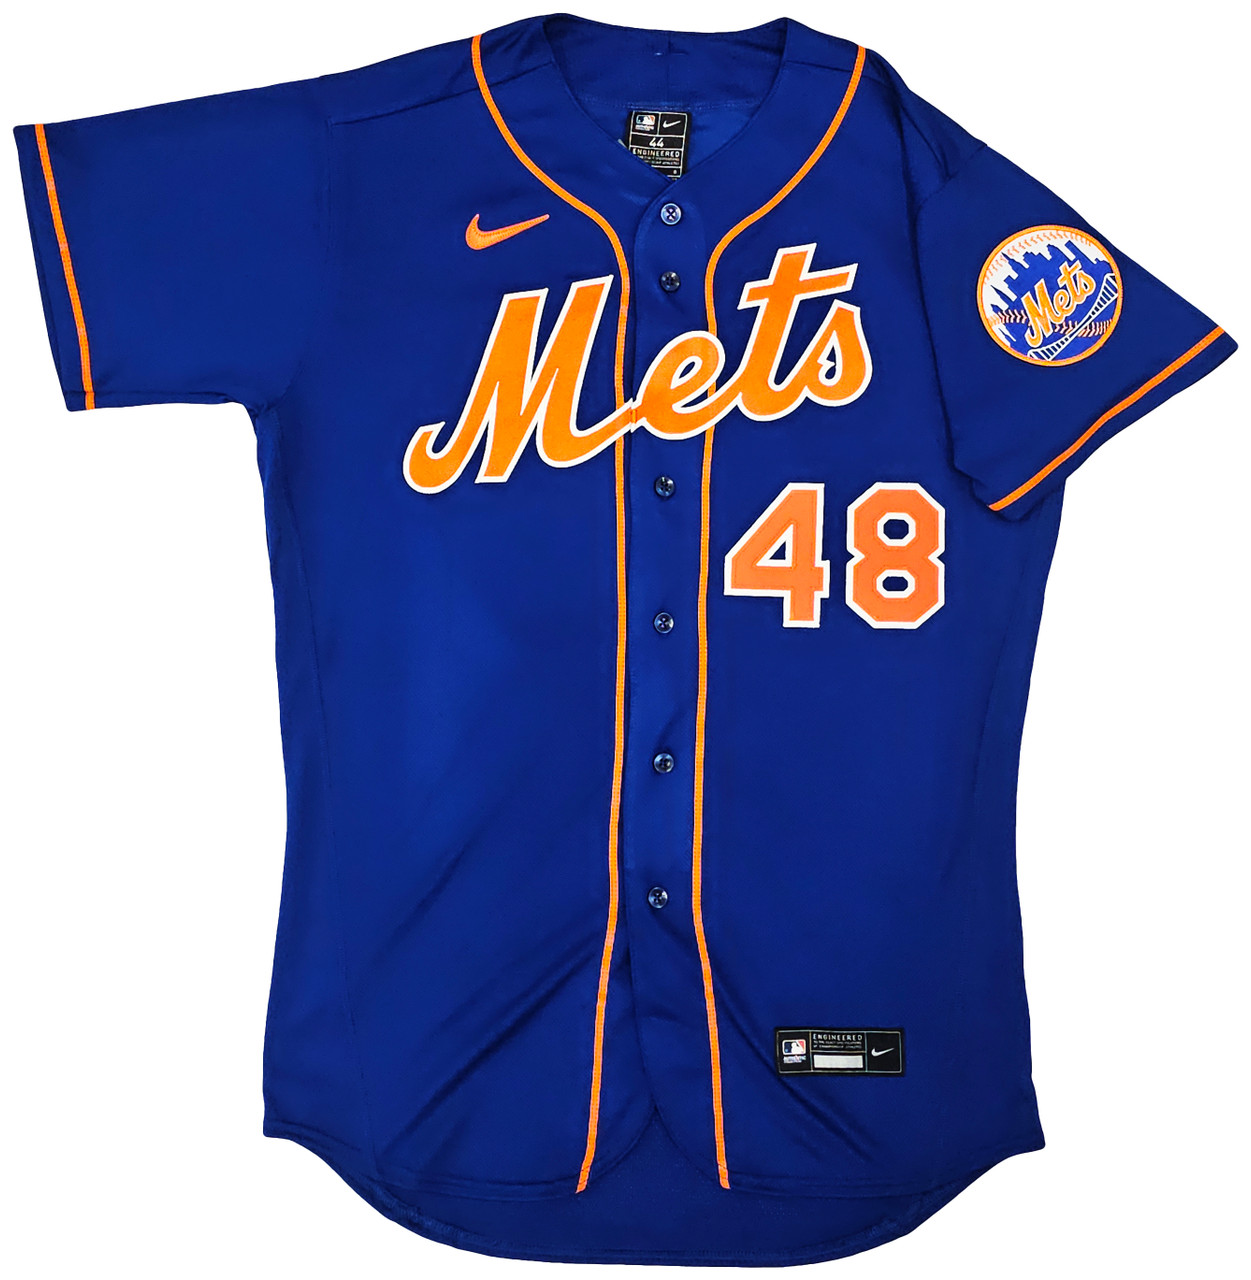 Jacob deGrom 18-19 NL CY Signed Authentic Mets Nike Jersey MLB